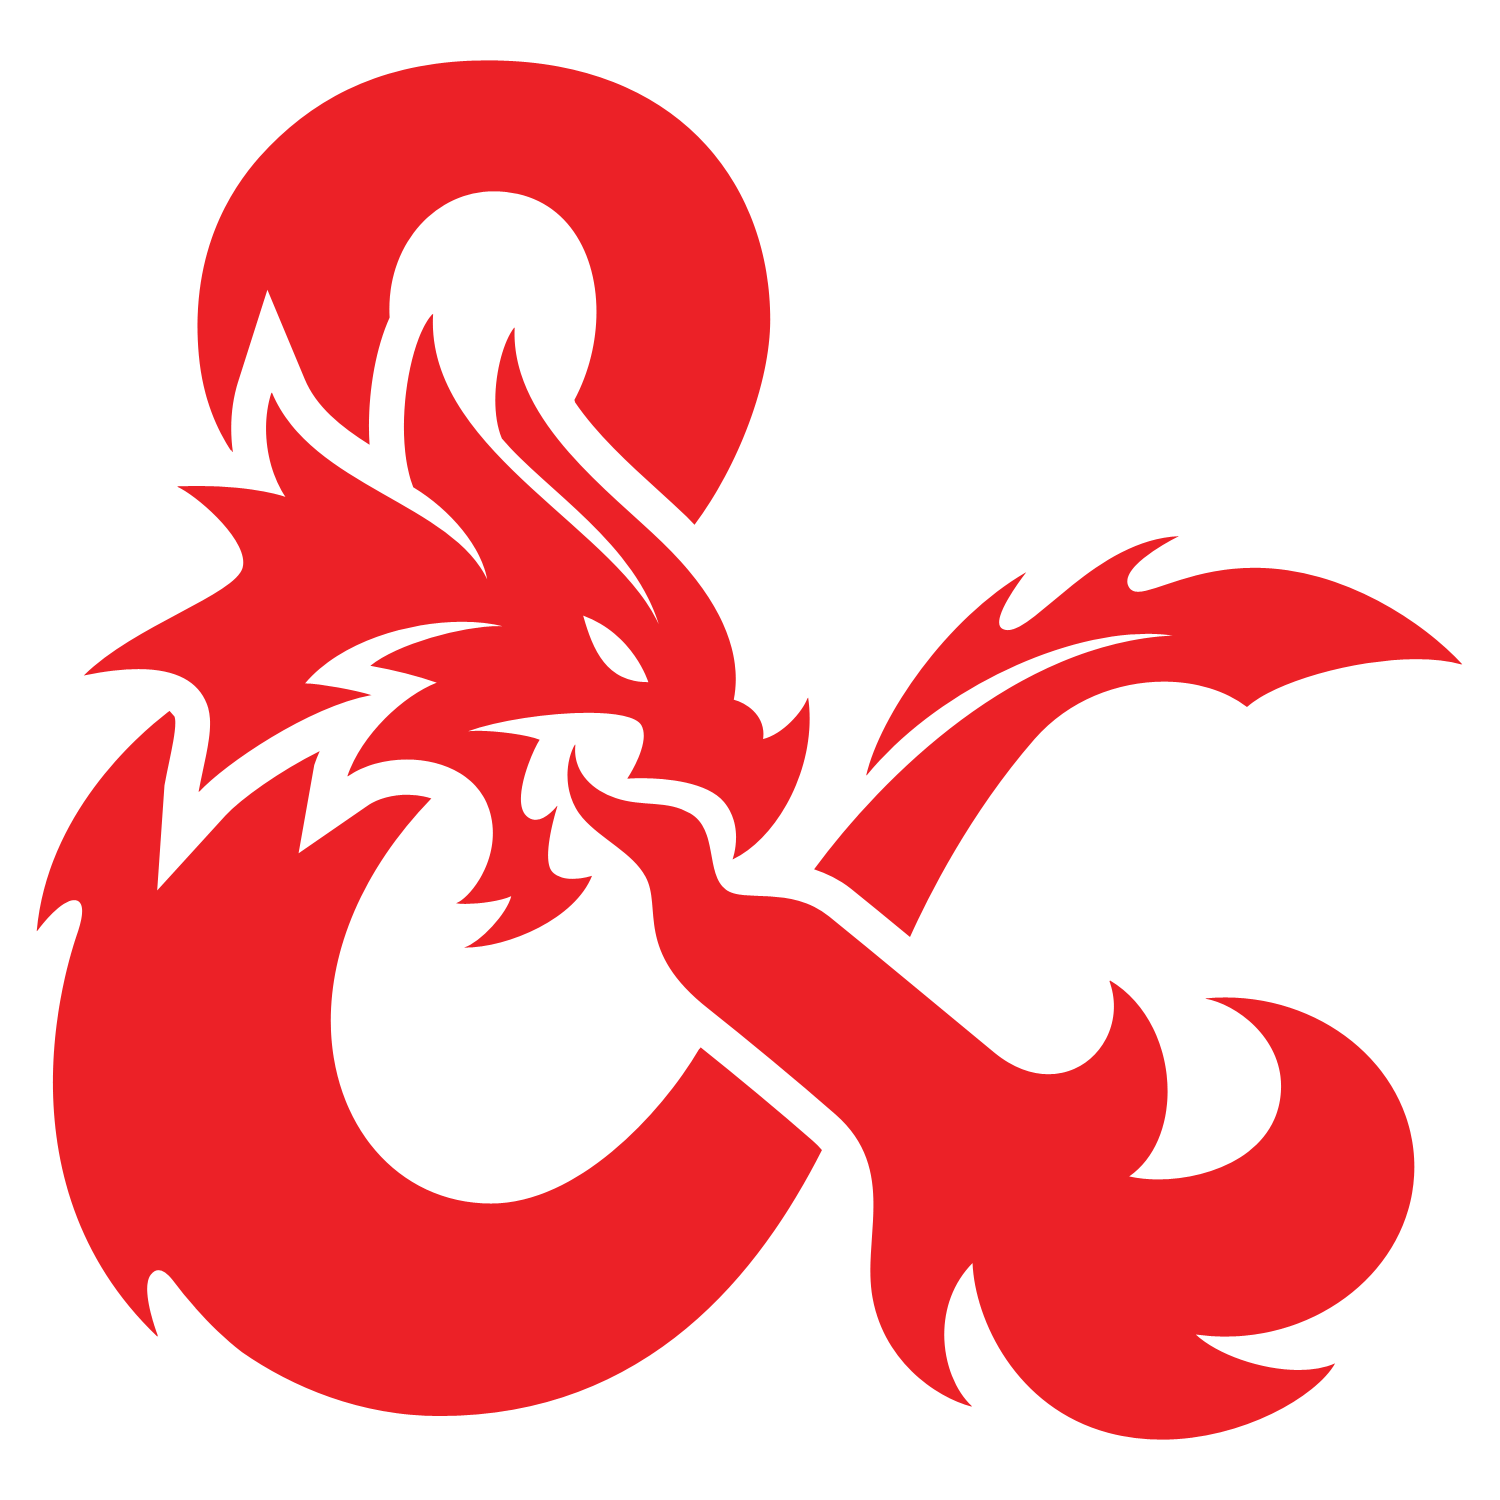 image of a dragon forming the and symbol